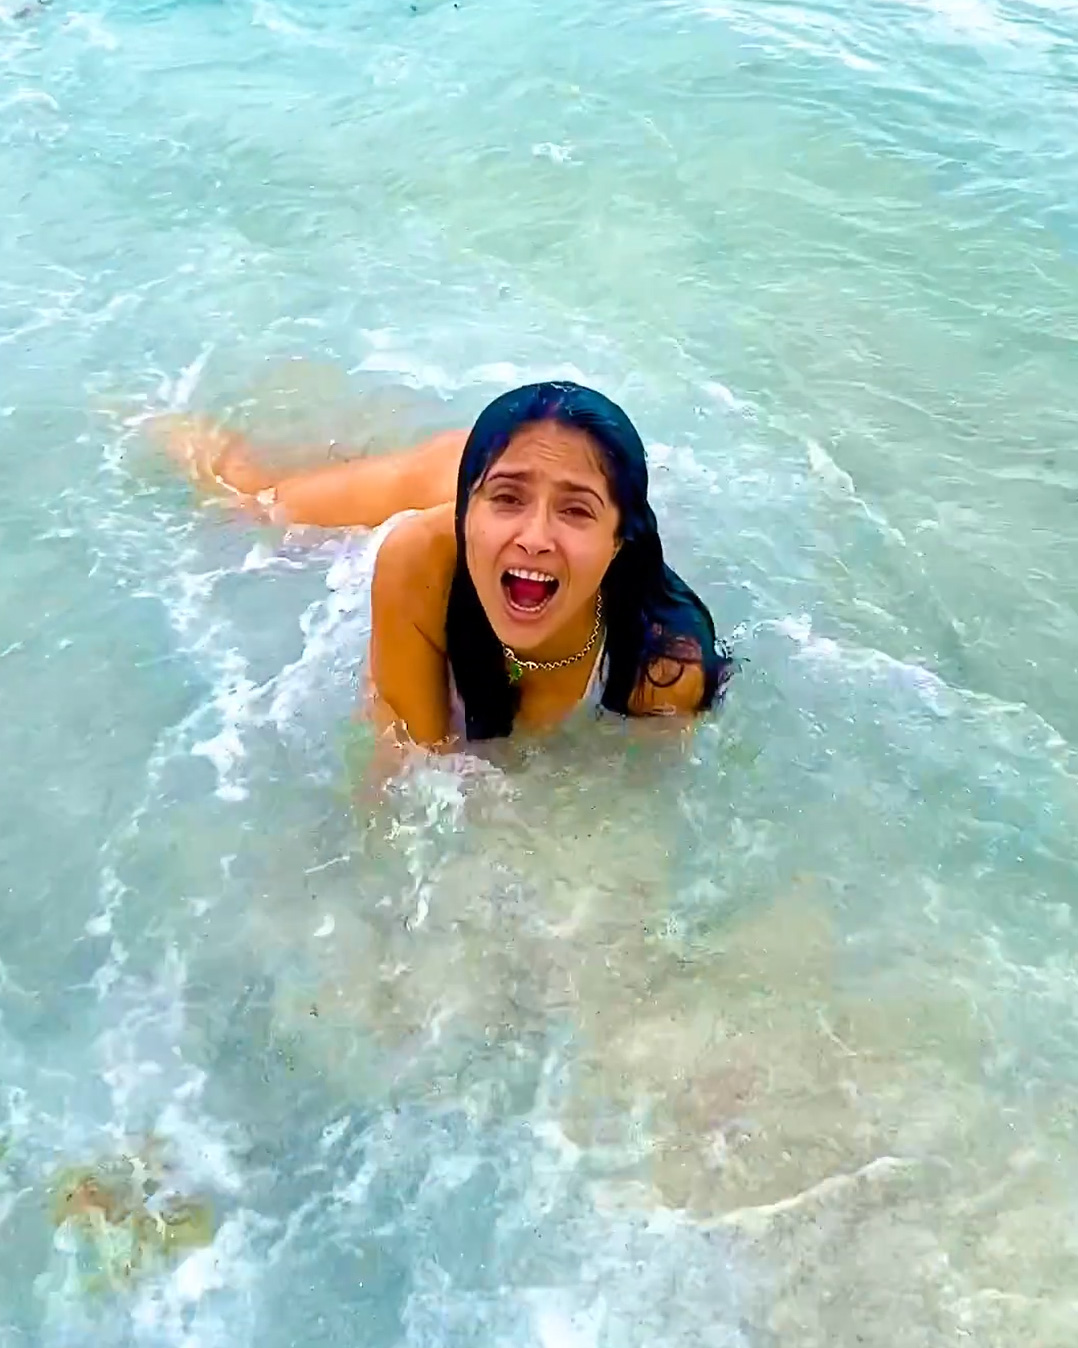 An Instagram video showed Salma being knocked over by waves